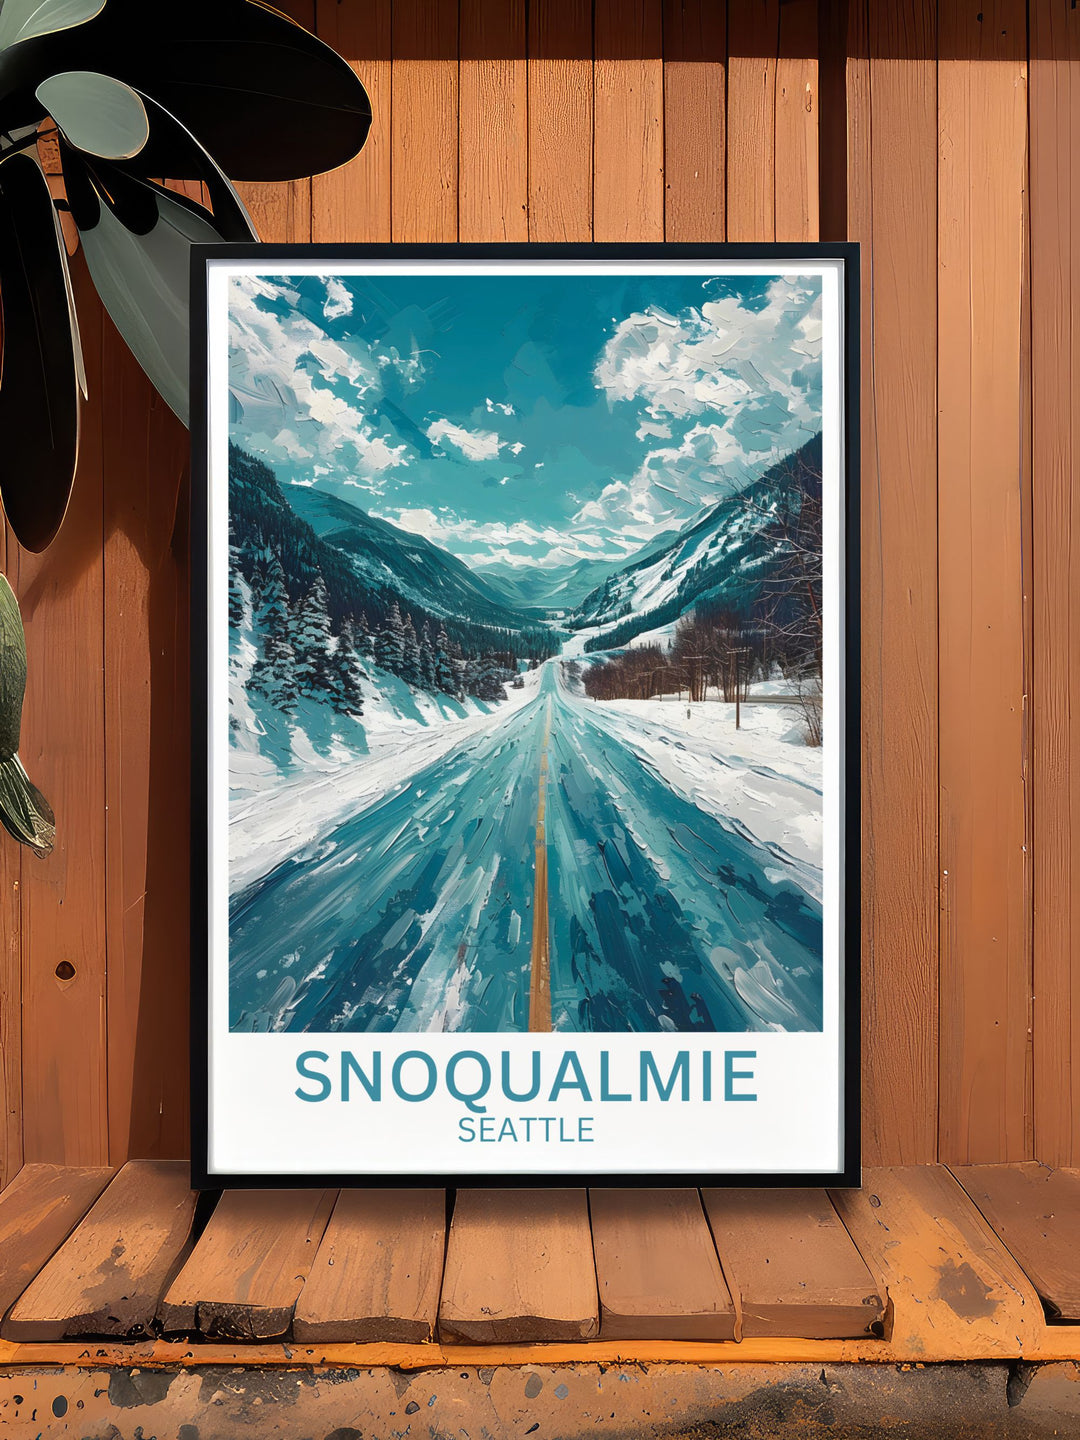 Showcase the alpine splendor of The Summit at Snoqualmie with this travel poster, perfect for adding a touch of Washingtons winter magic to your home decor.